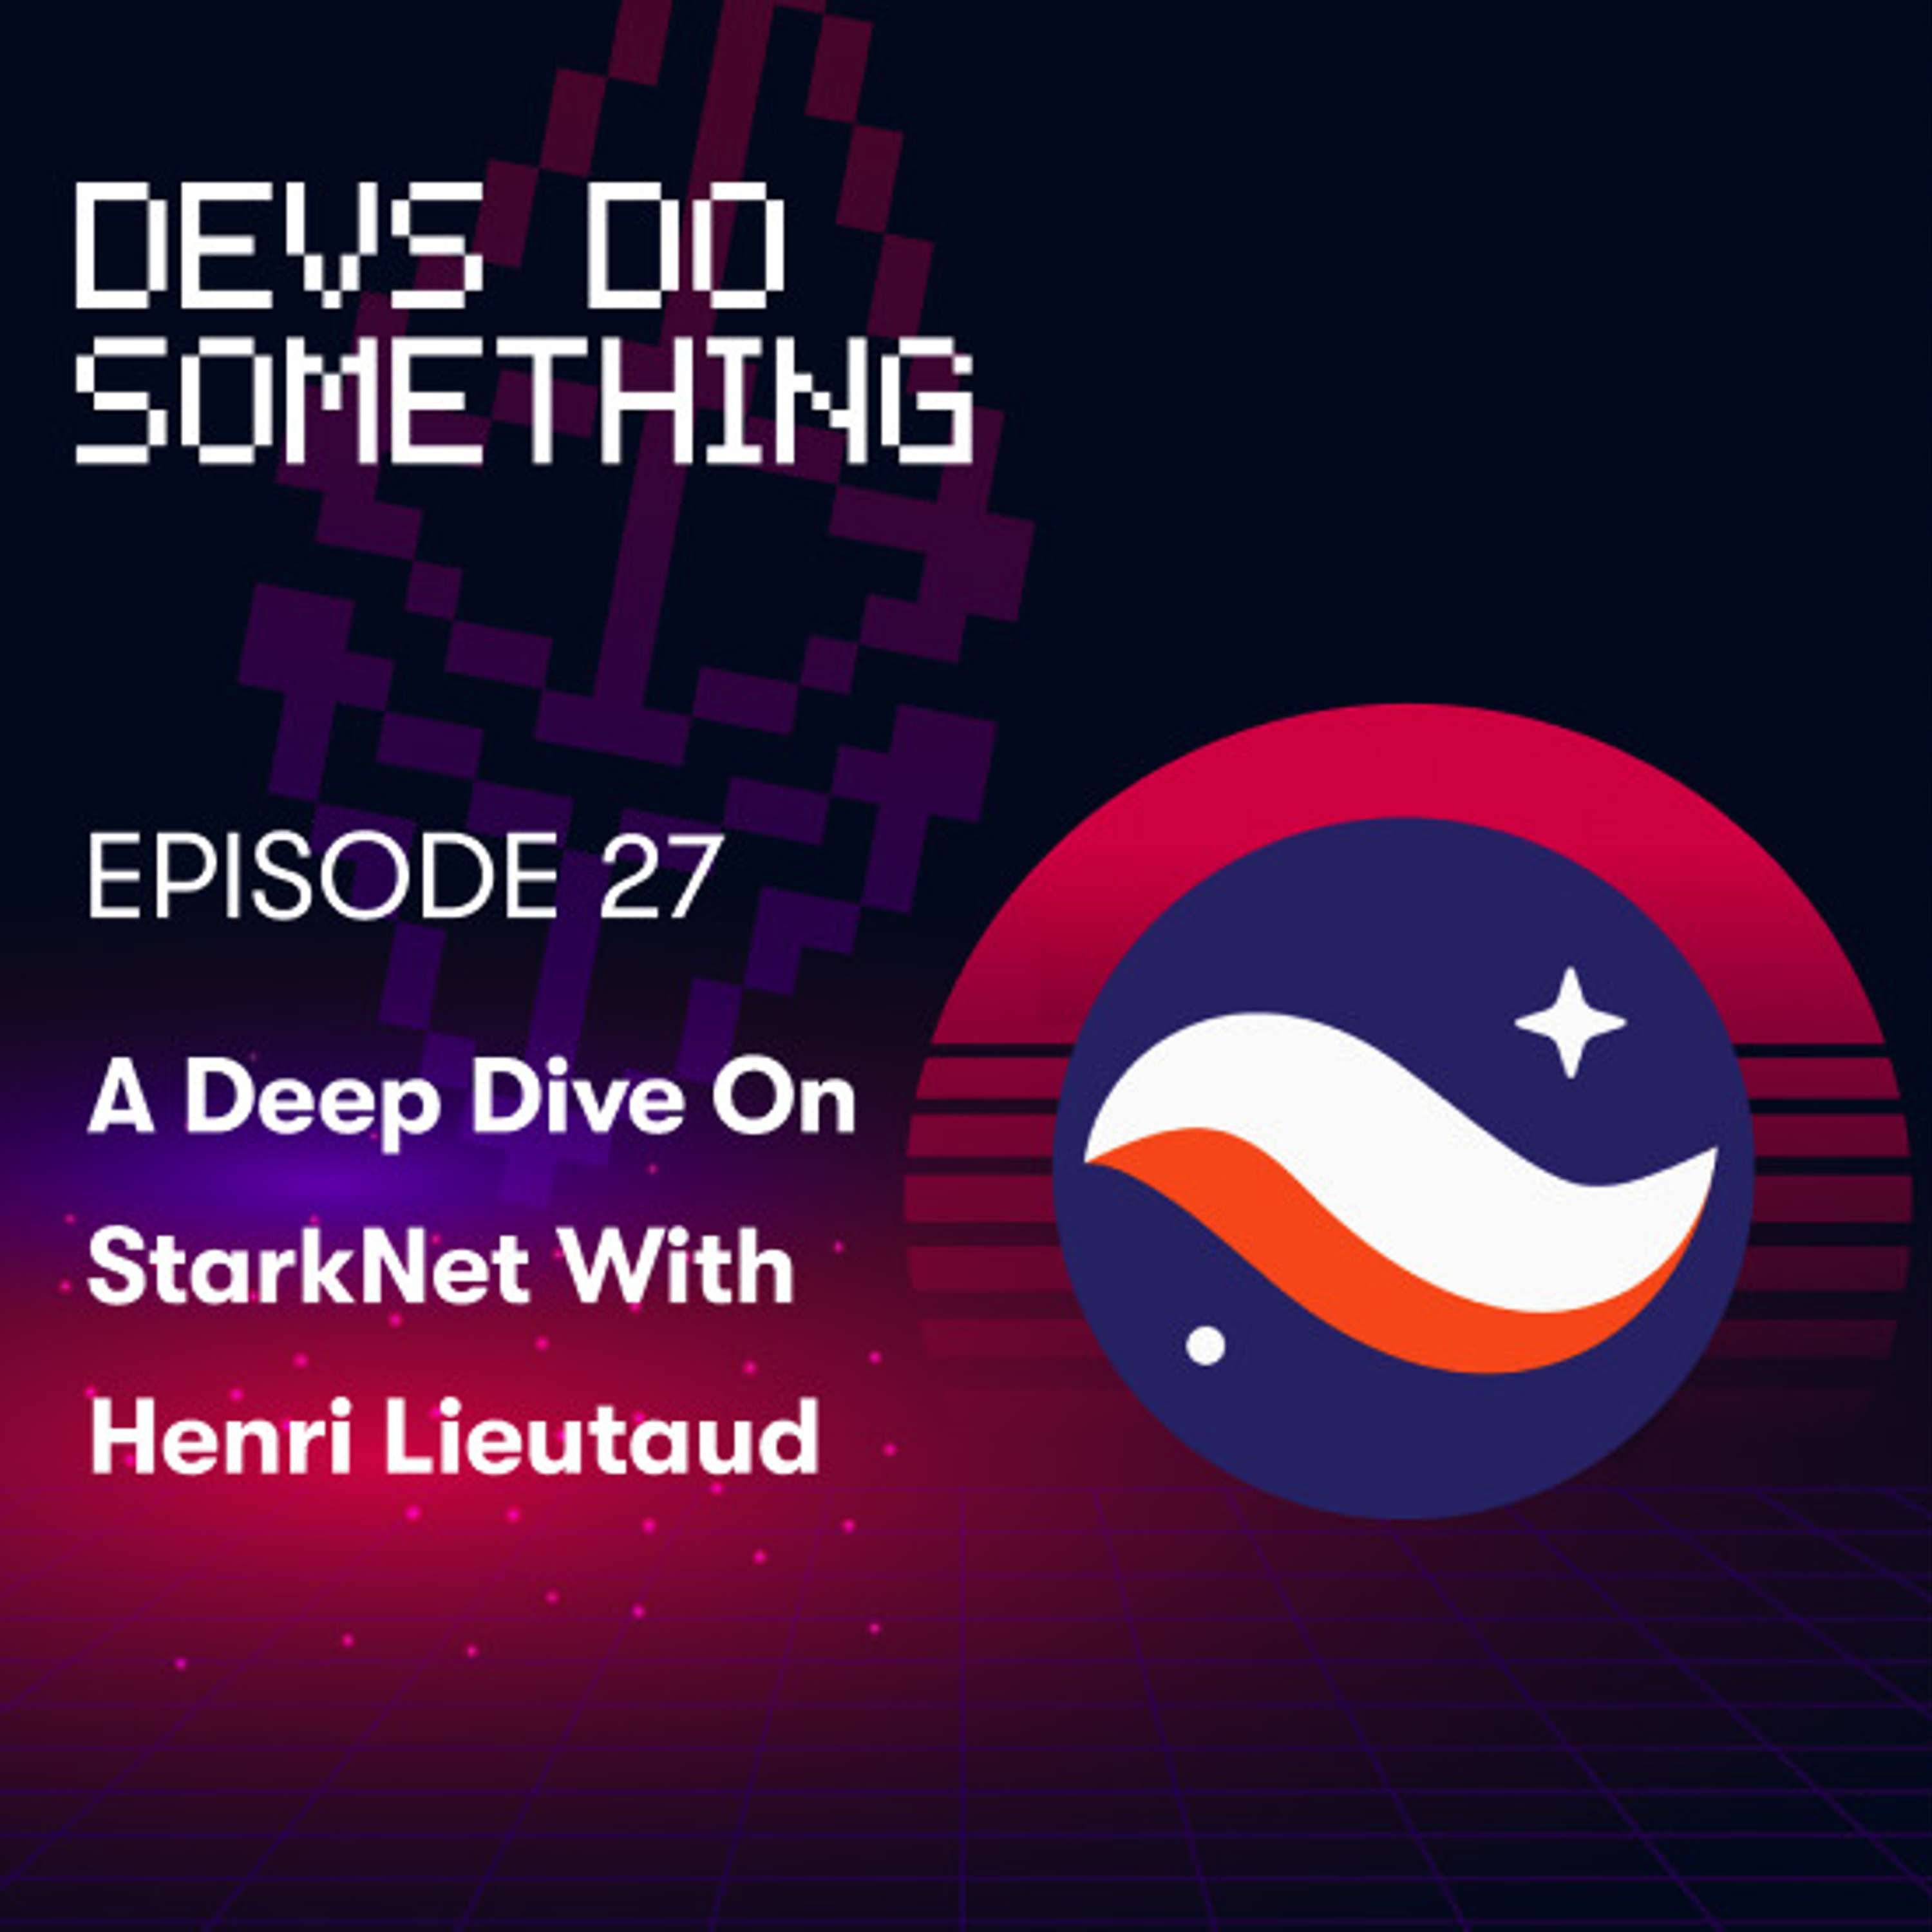 A Deep Dive on StarkNet with Henri Liuetad